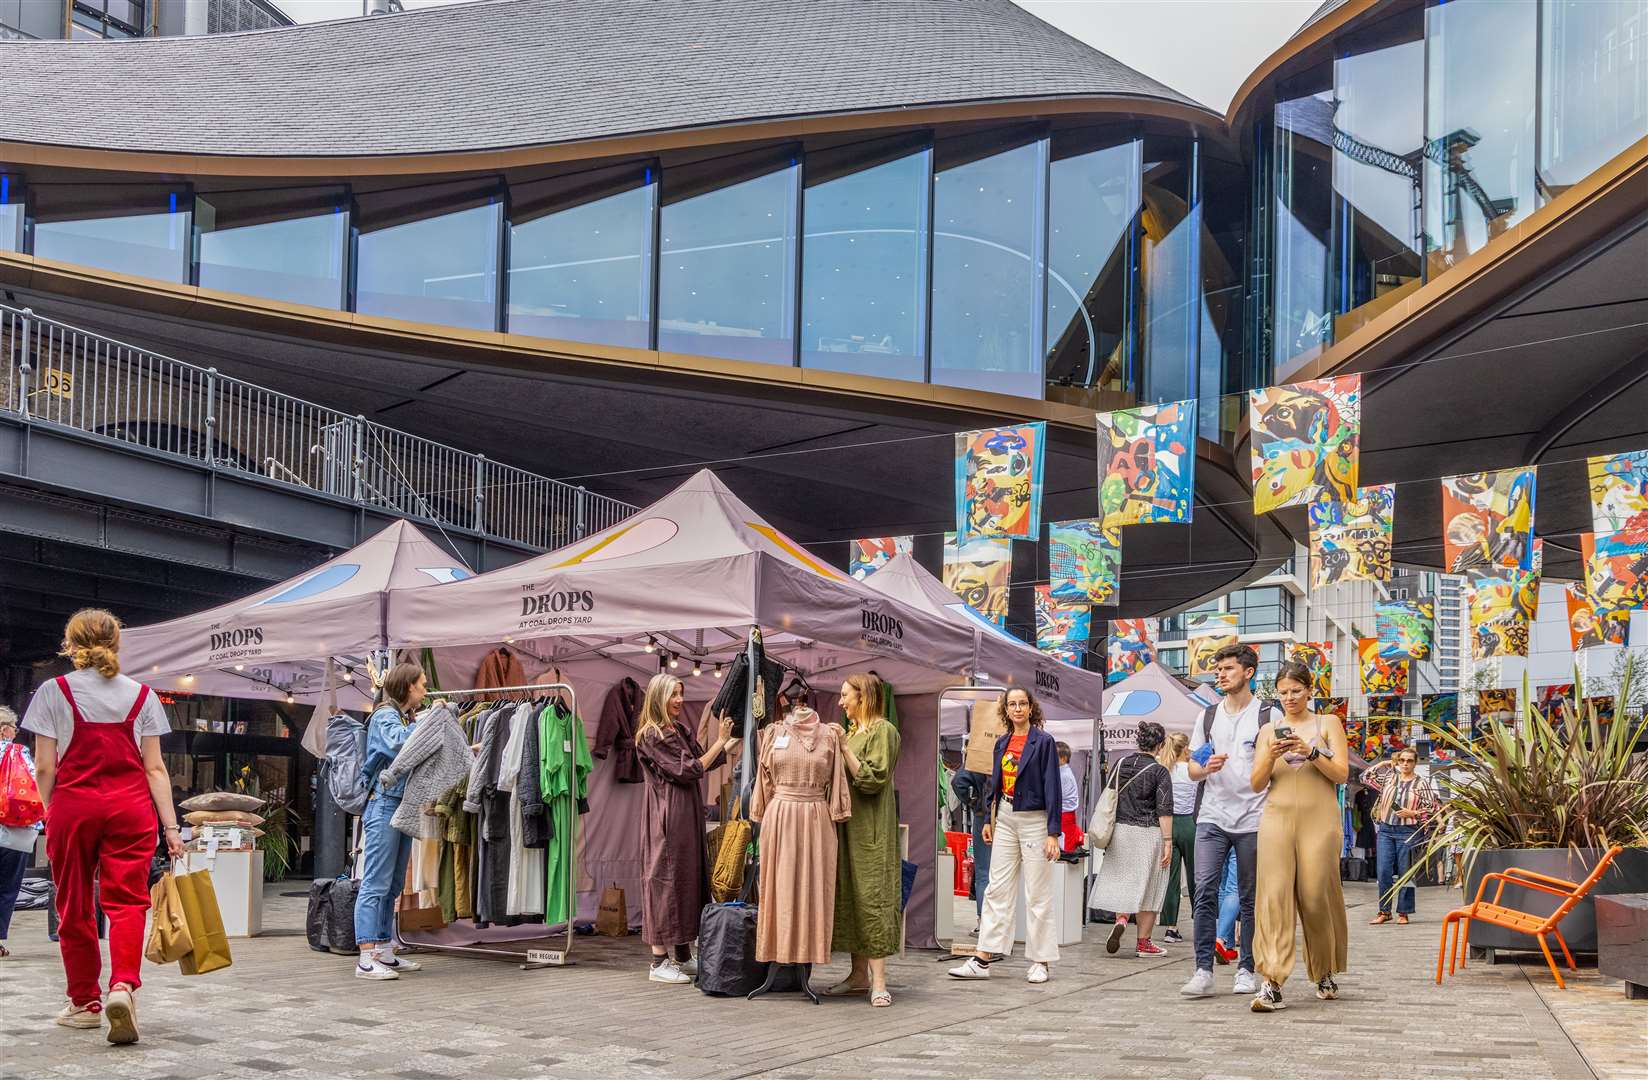 The Drops Fashion Market, Coal Drops Yard, Kings Cross Picture: Ed Reeve